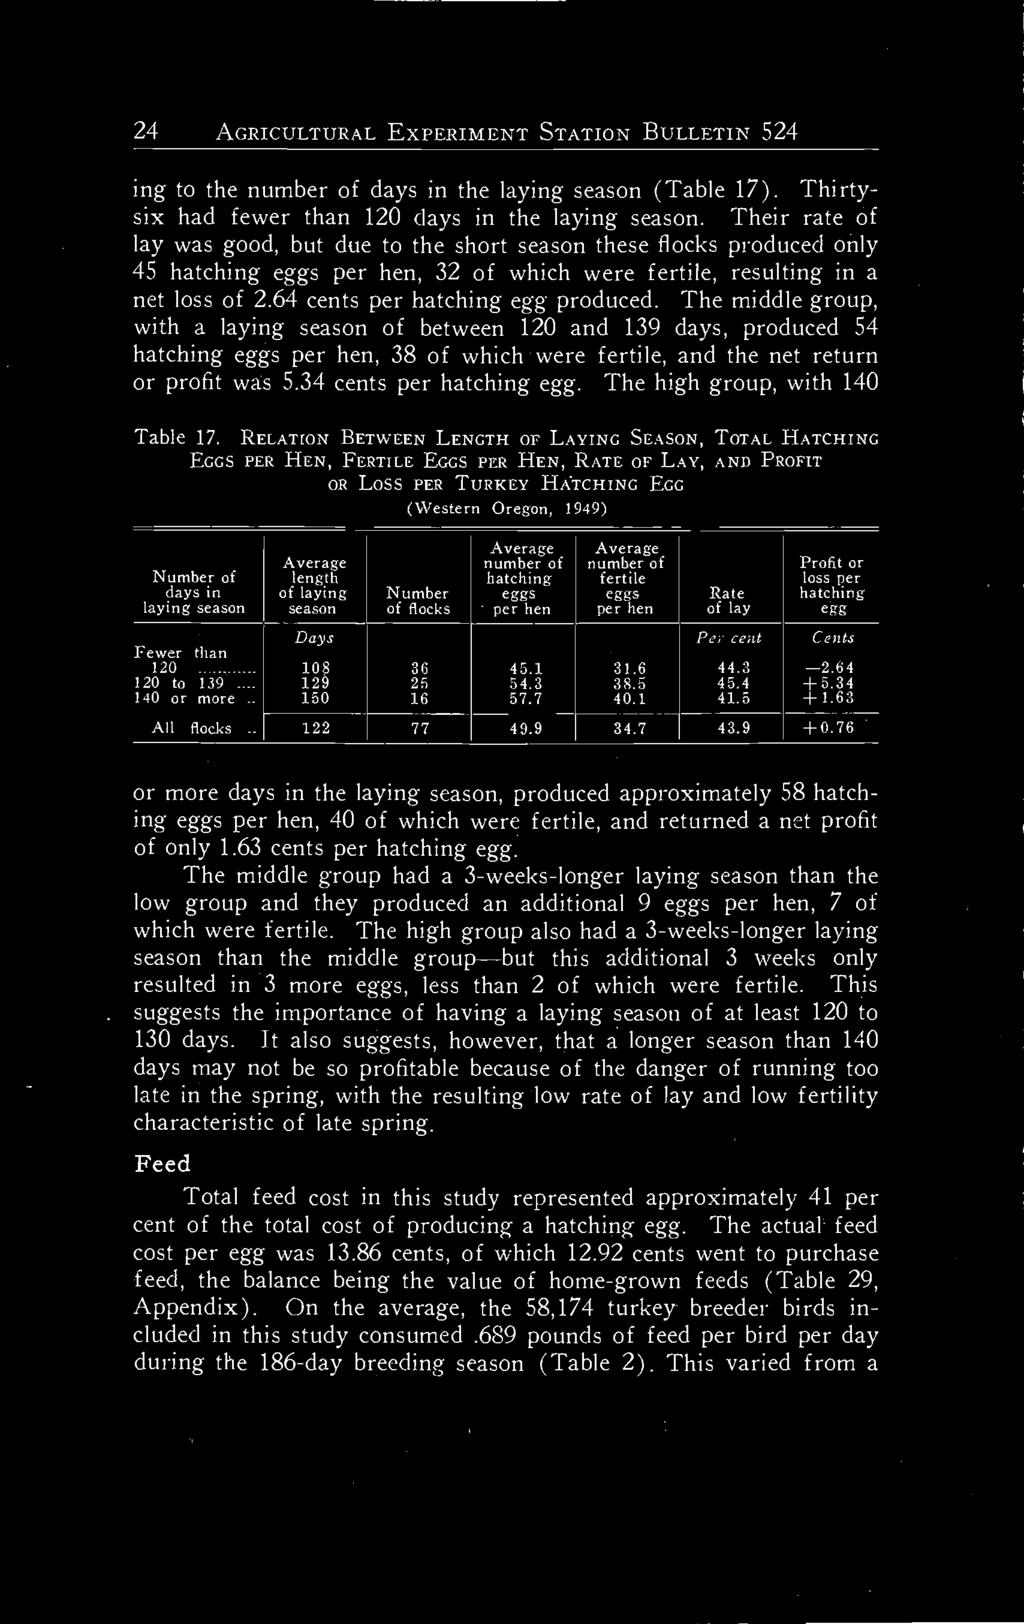 24 AGRICULTURAL EXPERIMENT STATION BULLETIN 524 ing to the number of days in the laying season (Table 17). Thirtysix had fewer than 120 clays in the laying season.